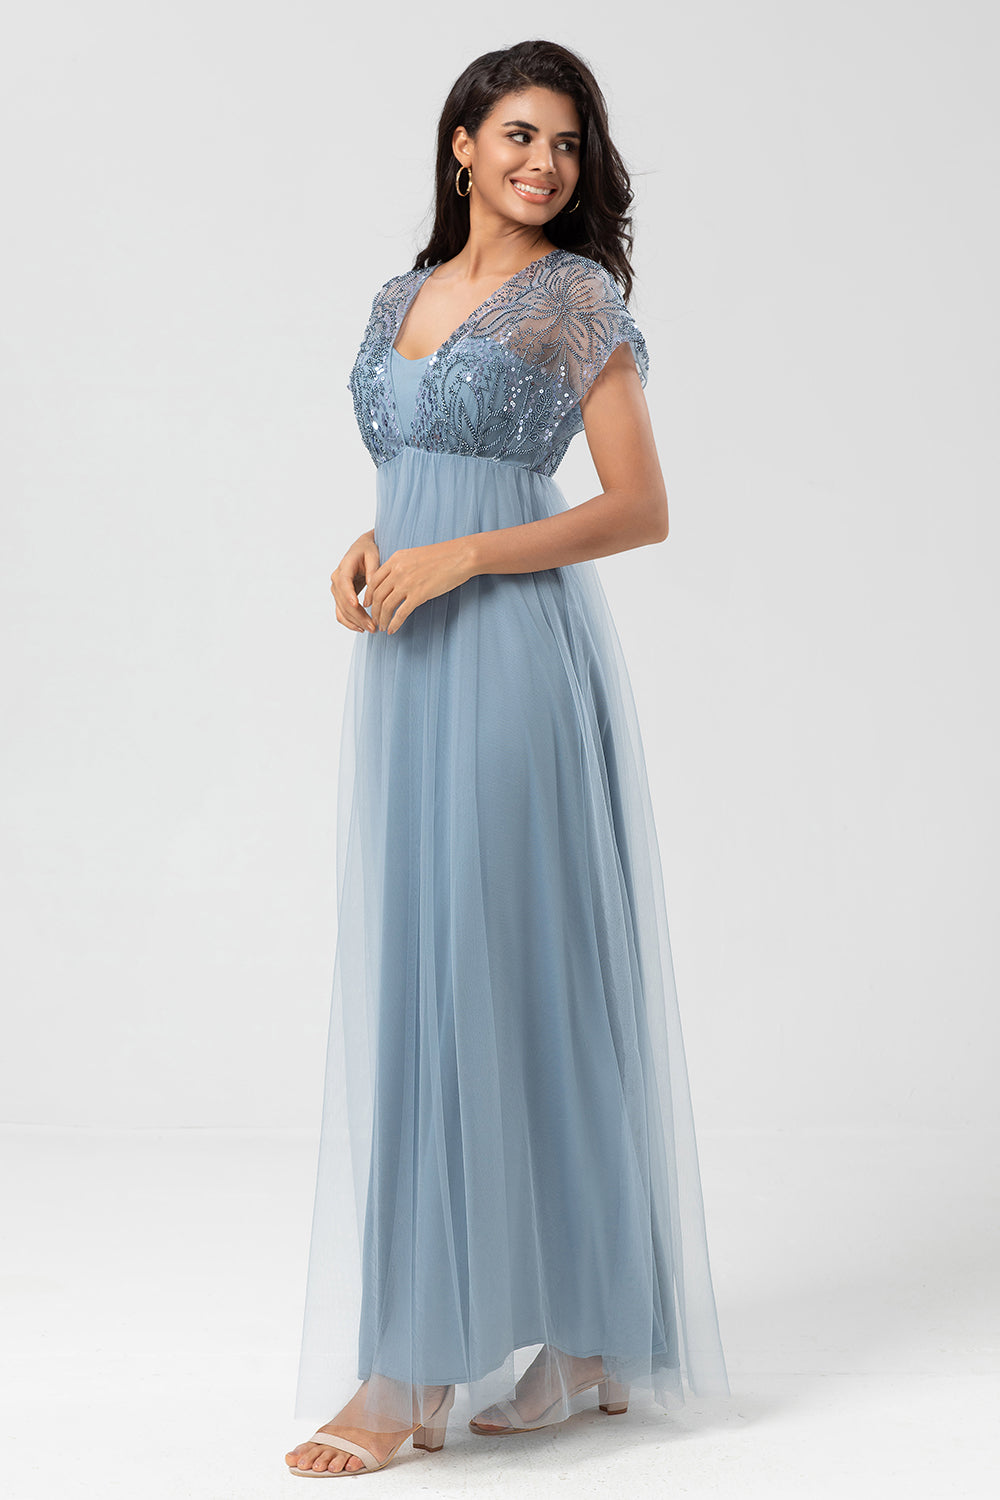 Bringing the Charm A-Line Sage Maternity Bridesmaids Dresses with Sequins